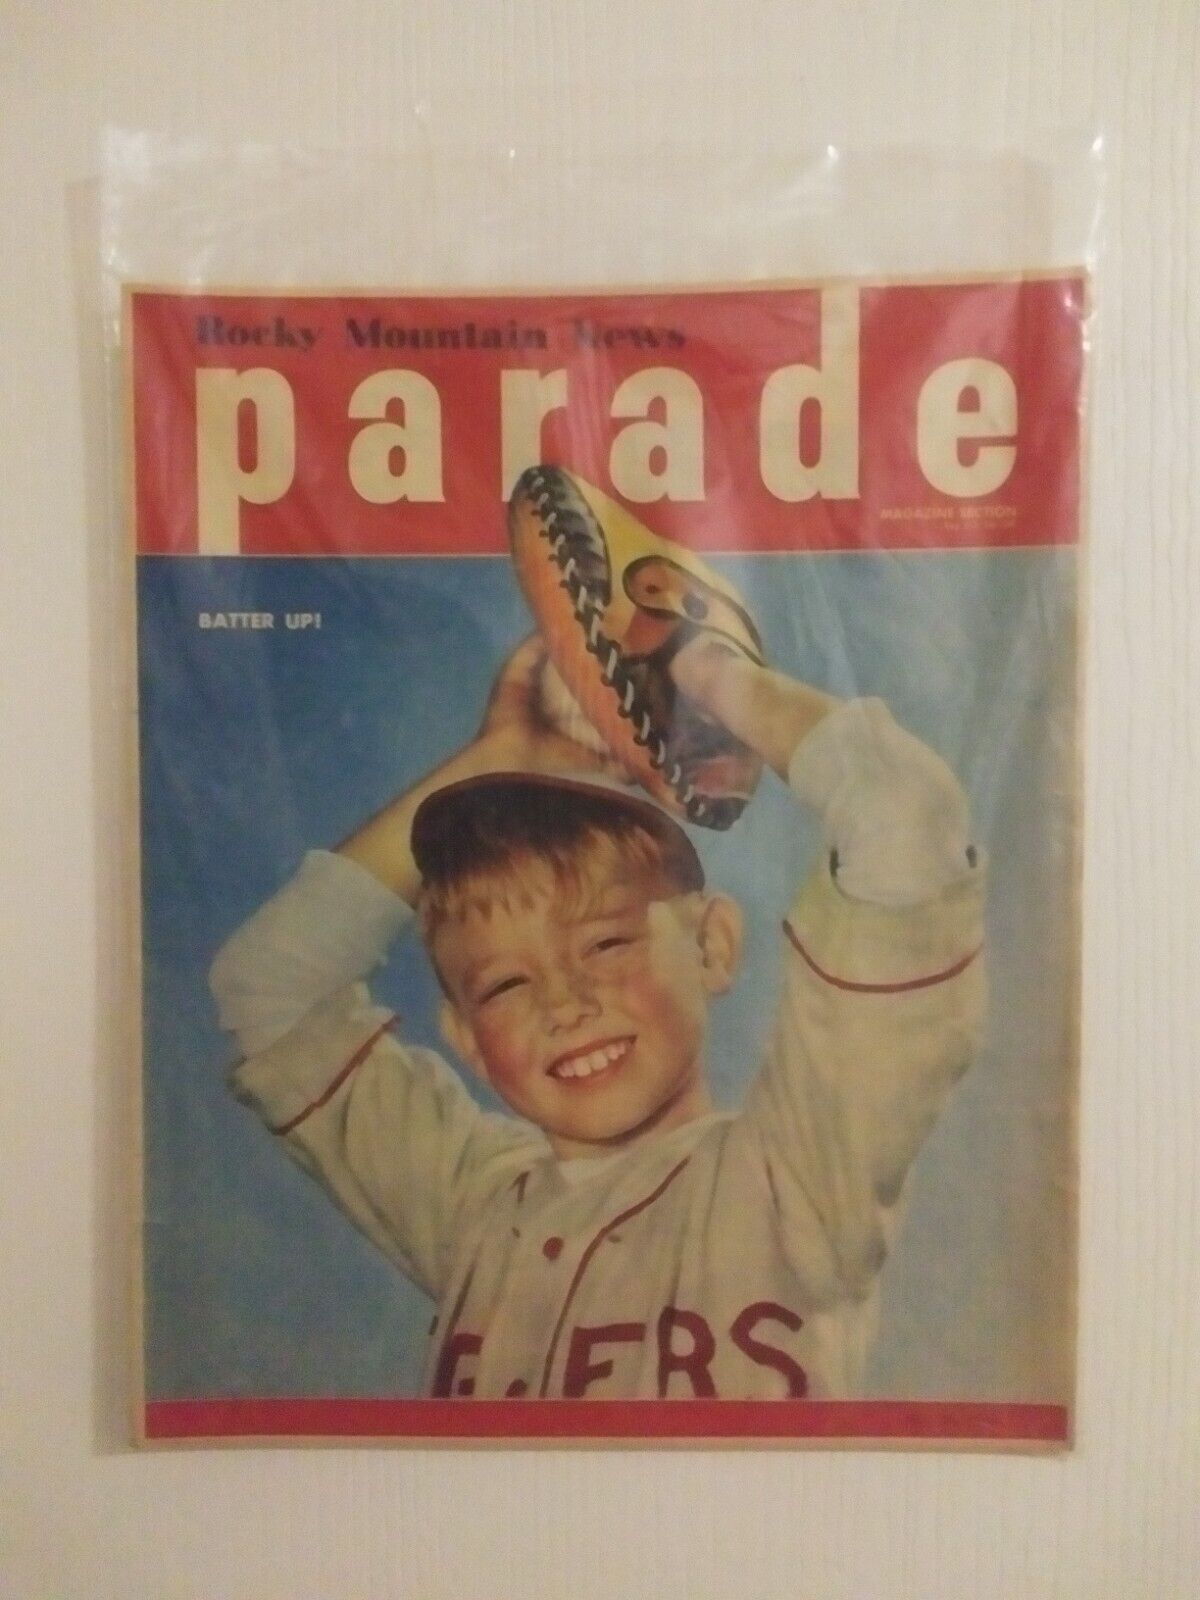 Vintage May 20, 1945 Rocky Mountain News Parade Batter Up Newspaper Magazine